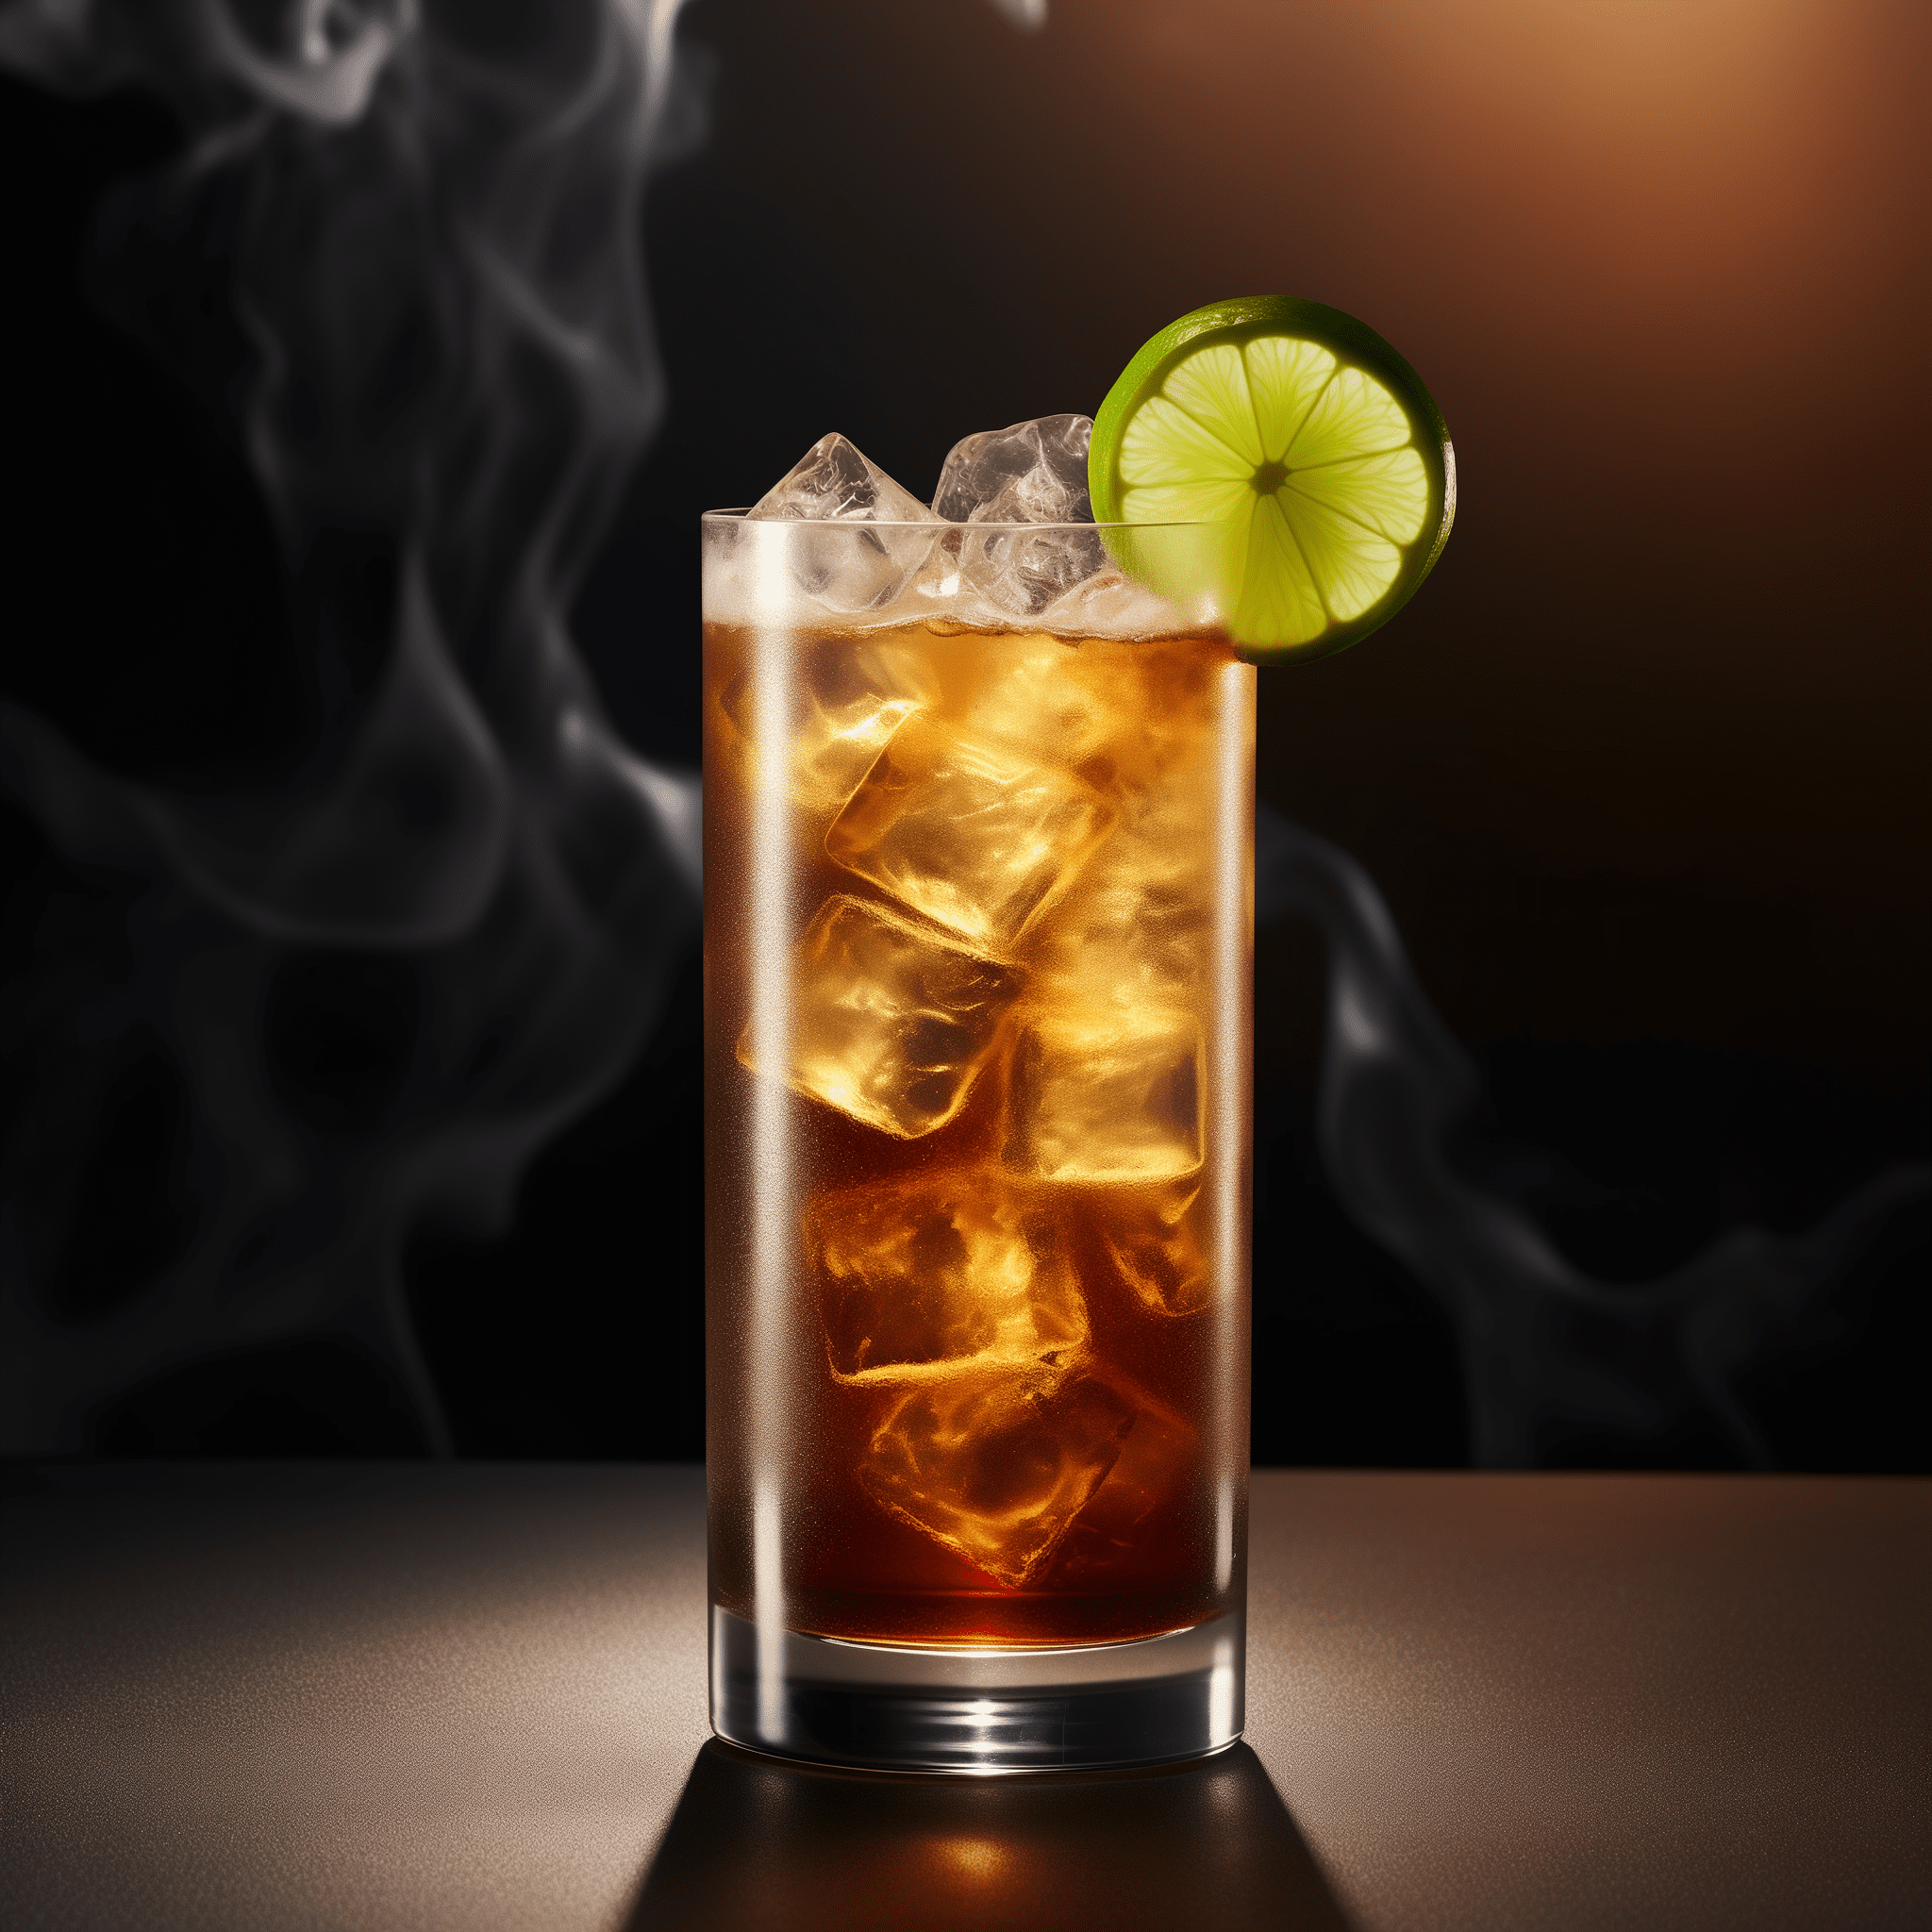 Tornado Cocktail Recipe - The Tornado cocktail is a robust and intense drink with a sweet undertone from the cola and sugar. It's a complex mix that's both fiery and smooth, with a spirited aftertaste that lingers.